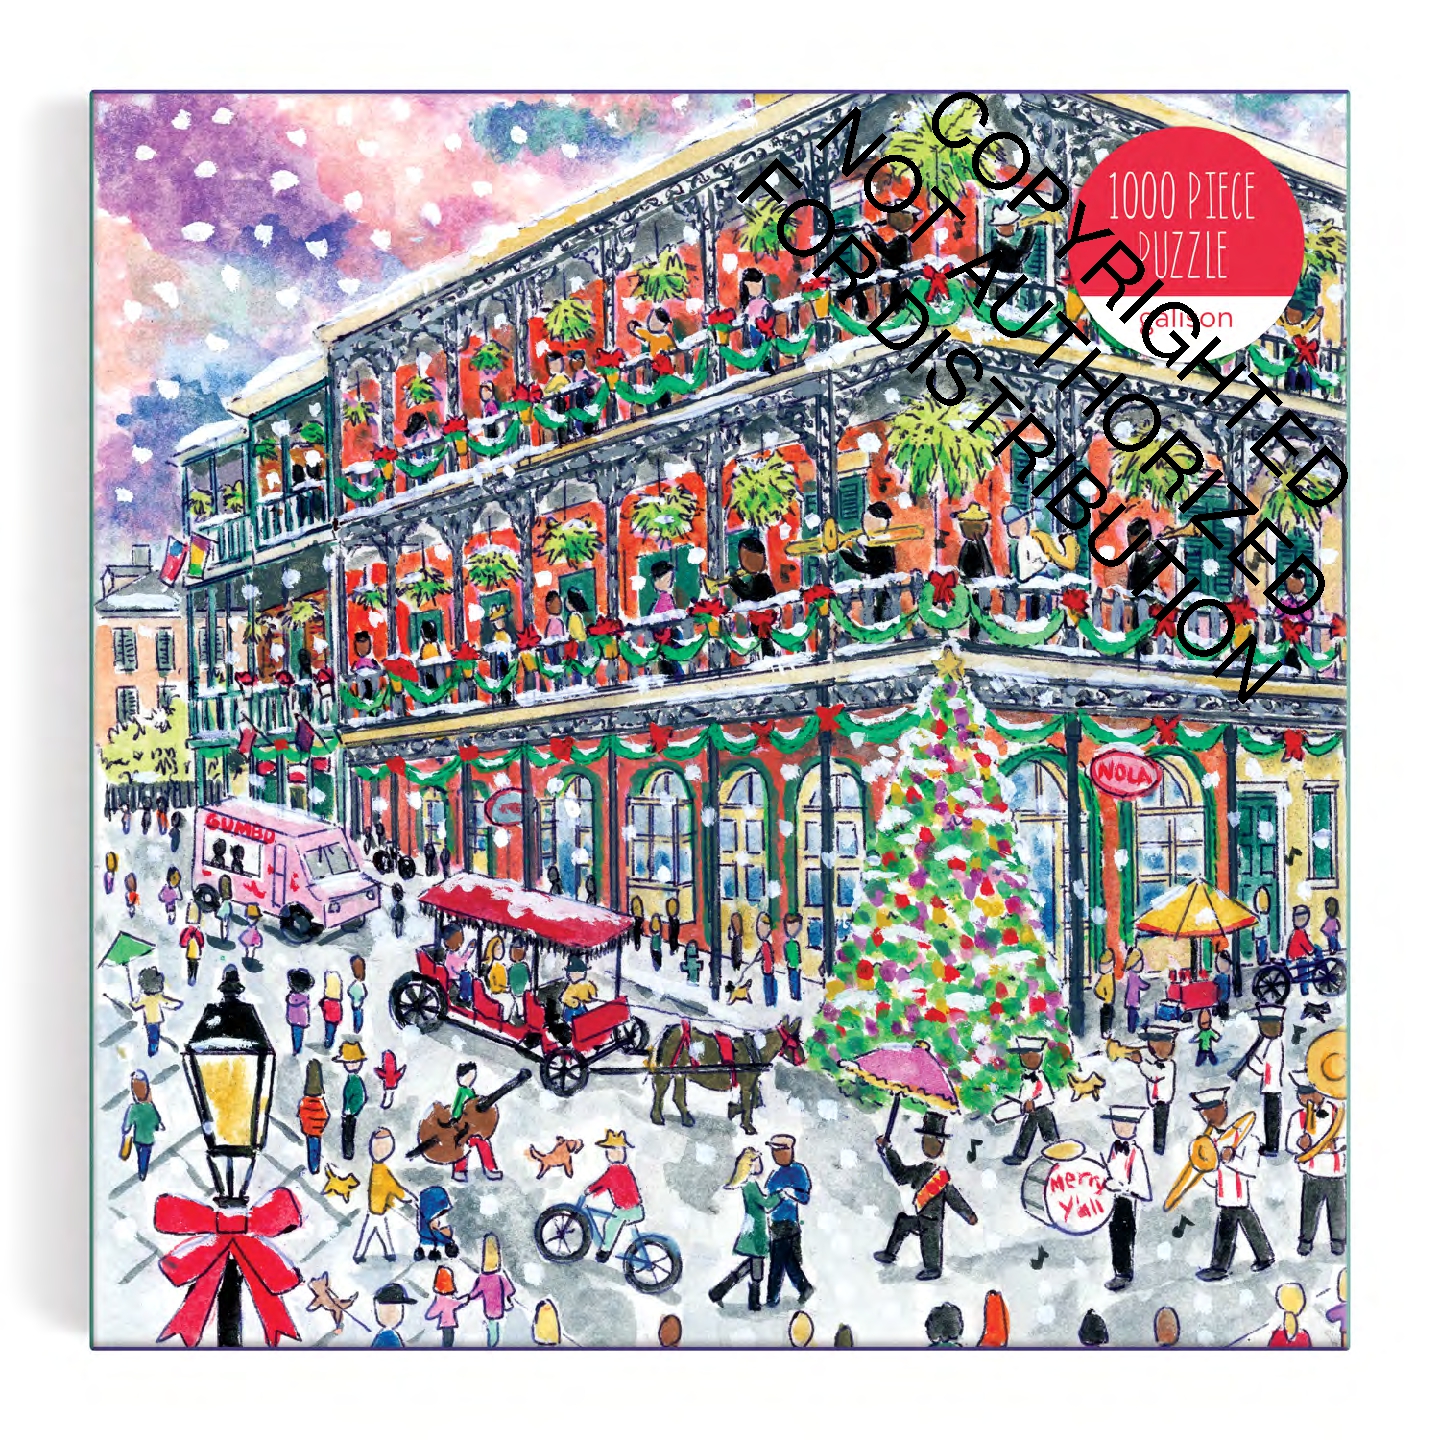 Michael Storrings Christmas in New Orleans 1000 Piece Puzzle with Square Box